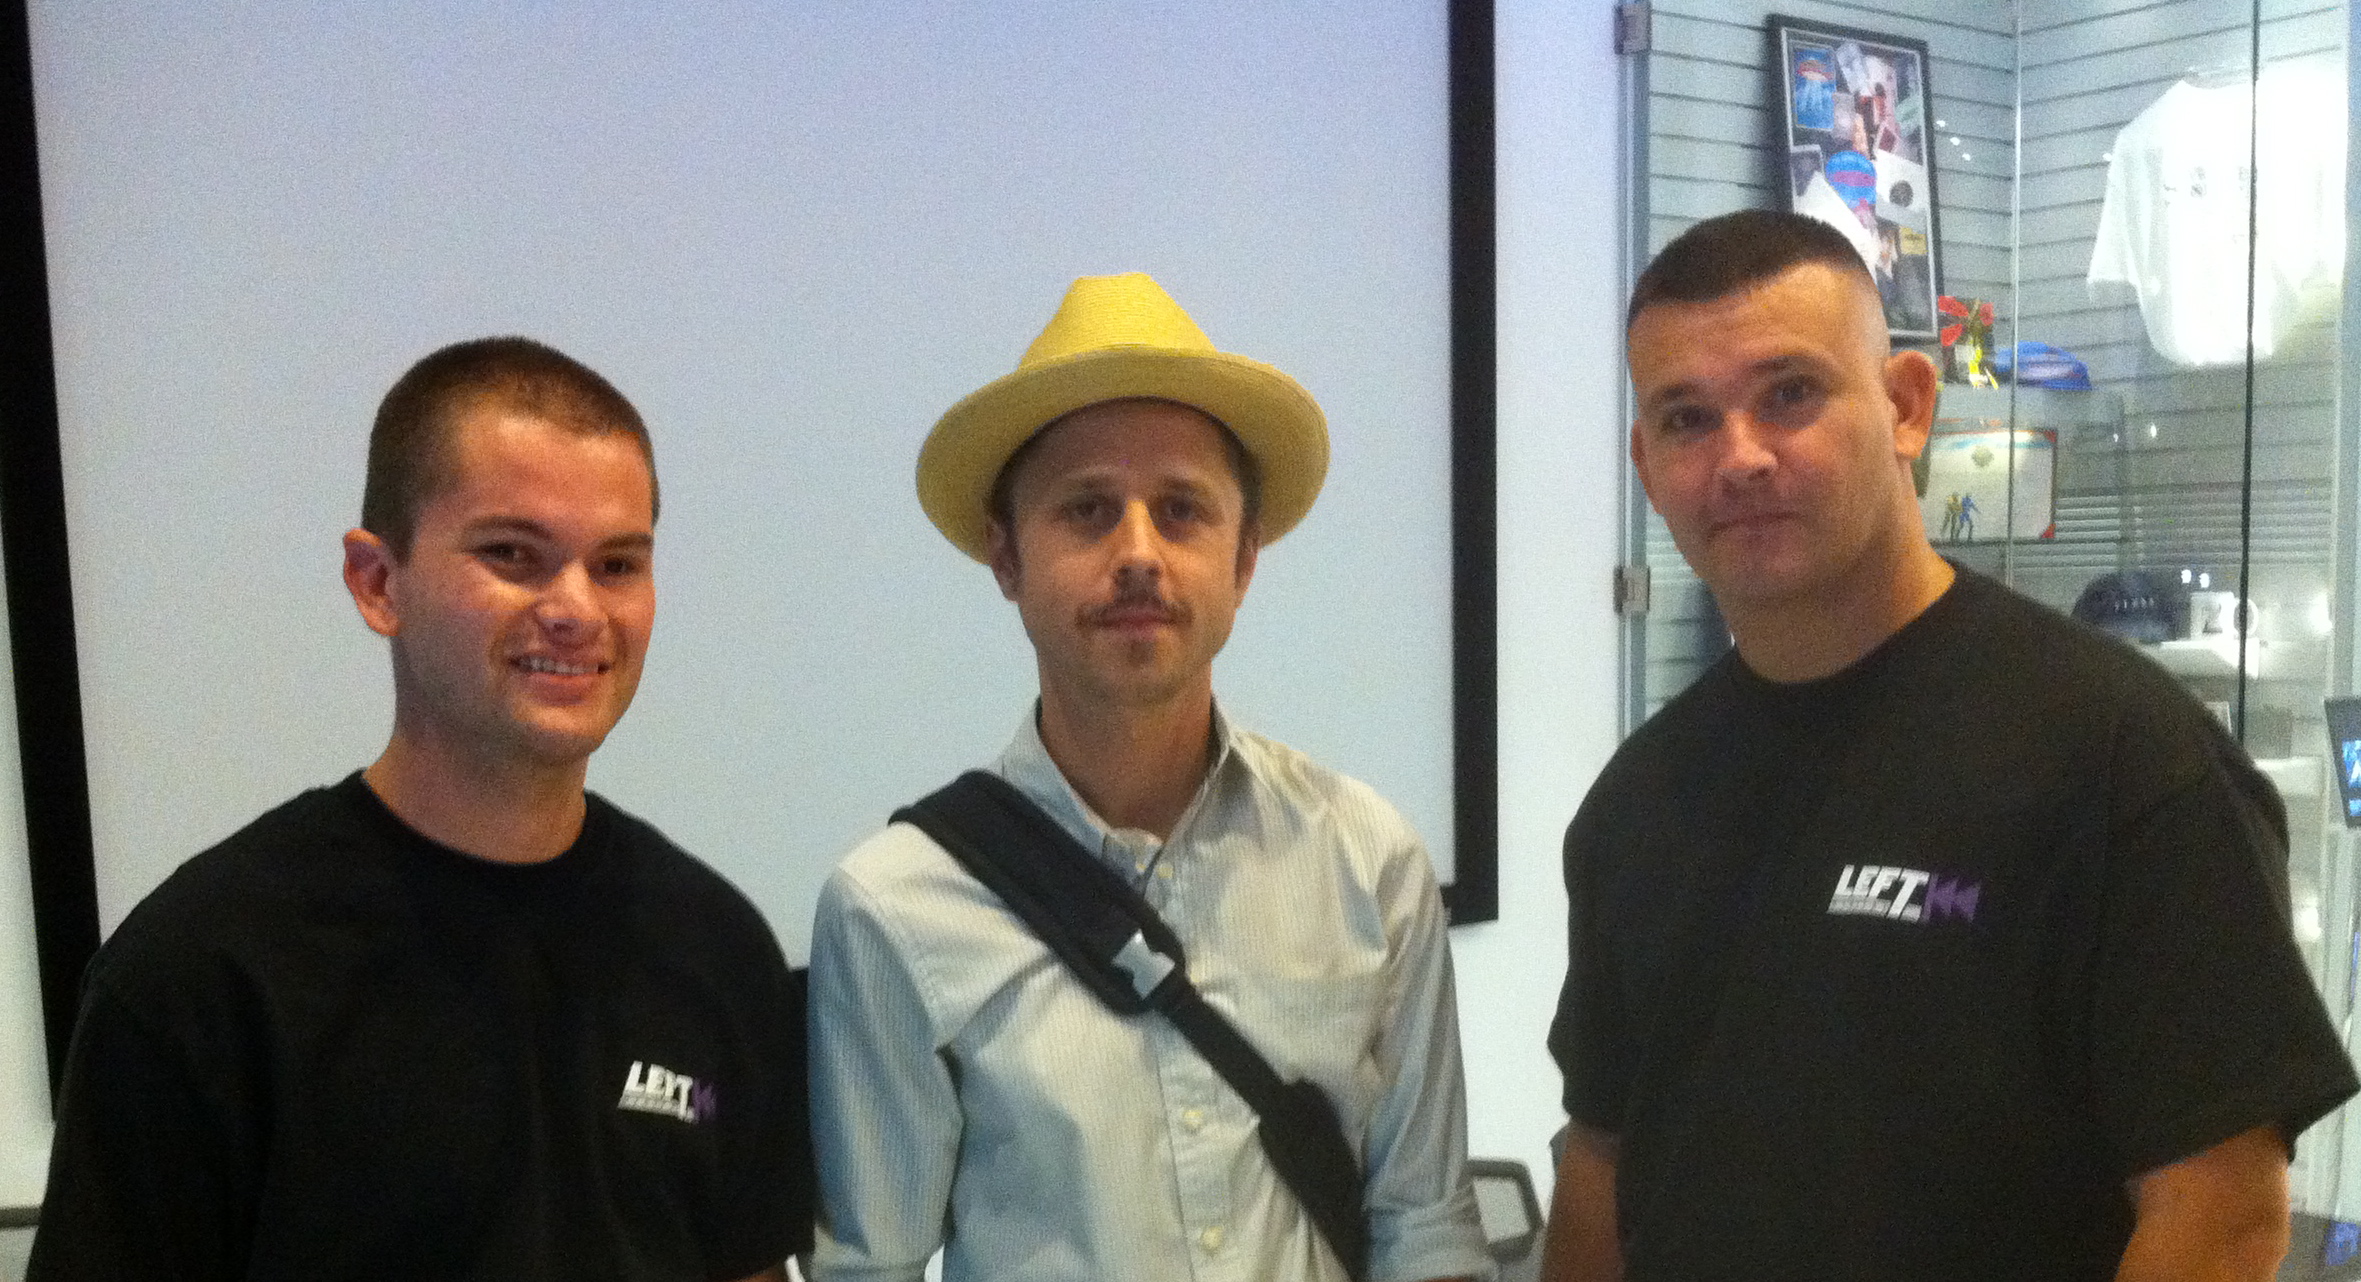 Photo with Giovanni Ribisi and business partner Rodney Luis Aquino.